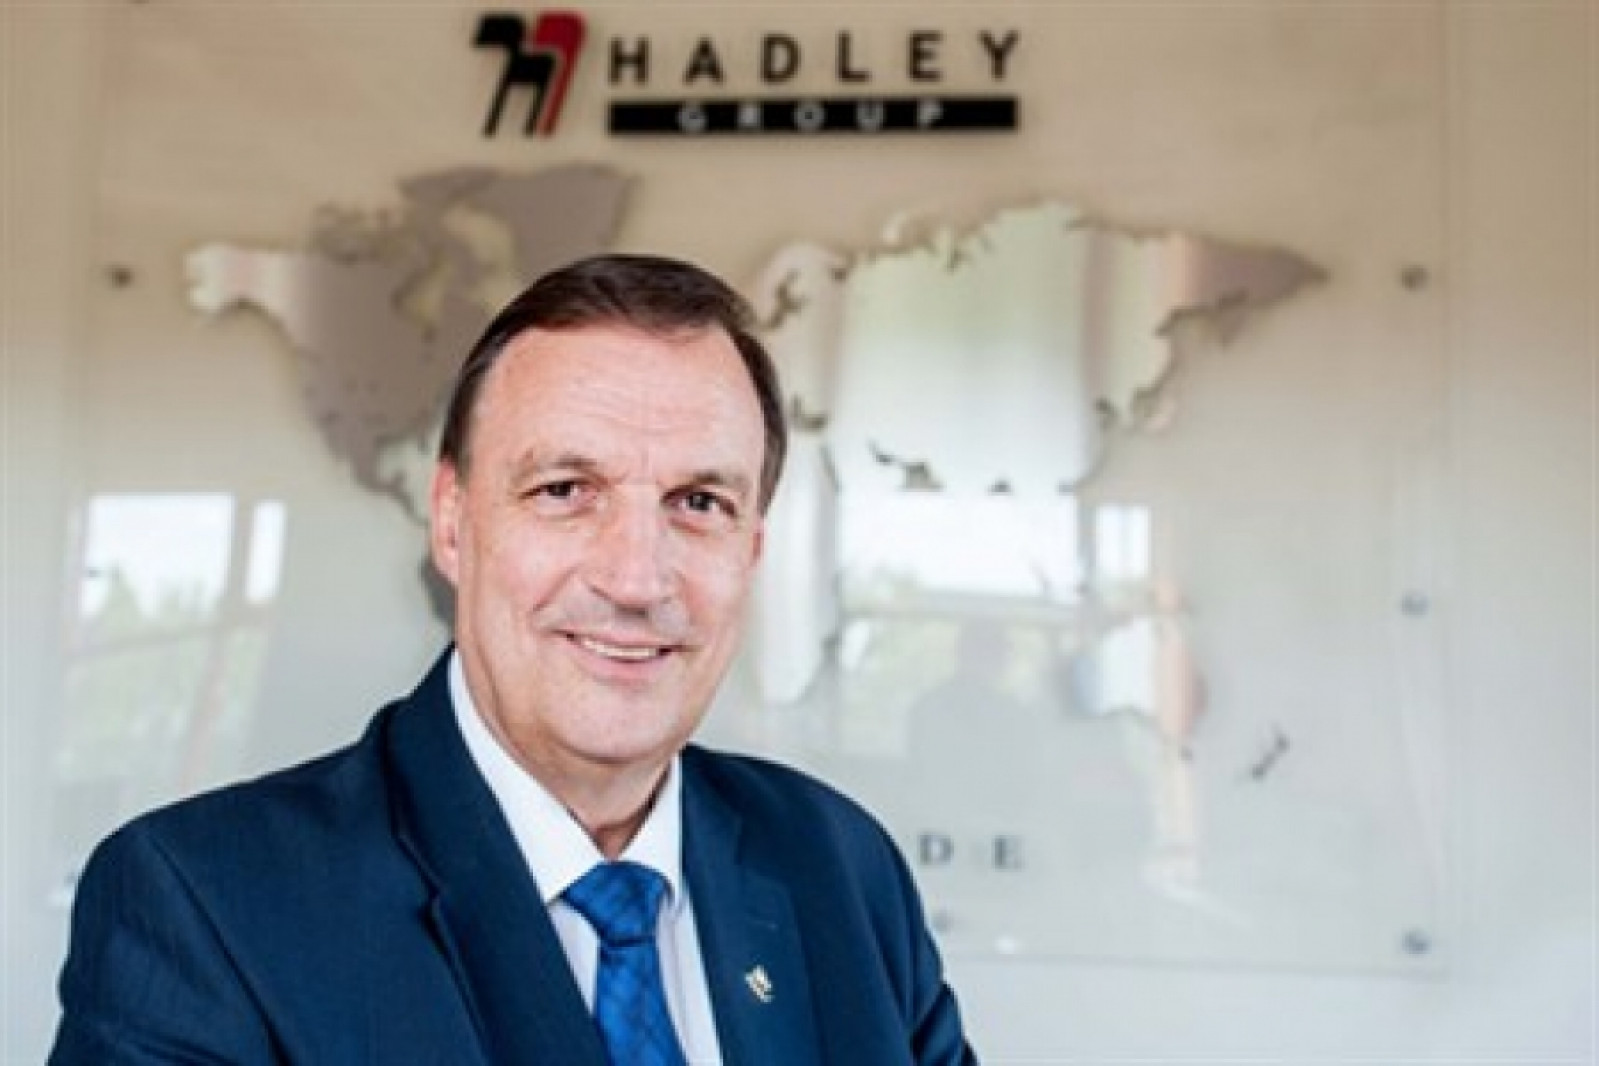 Hadley Group in the Netherlands